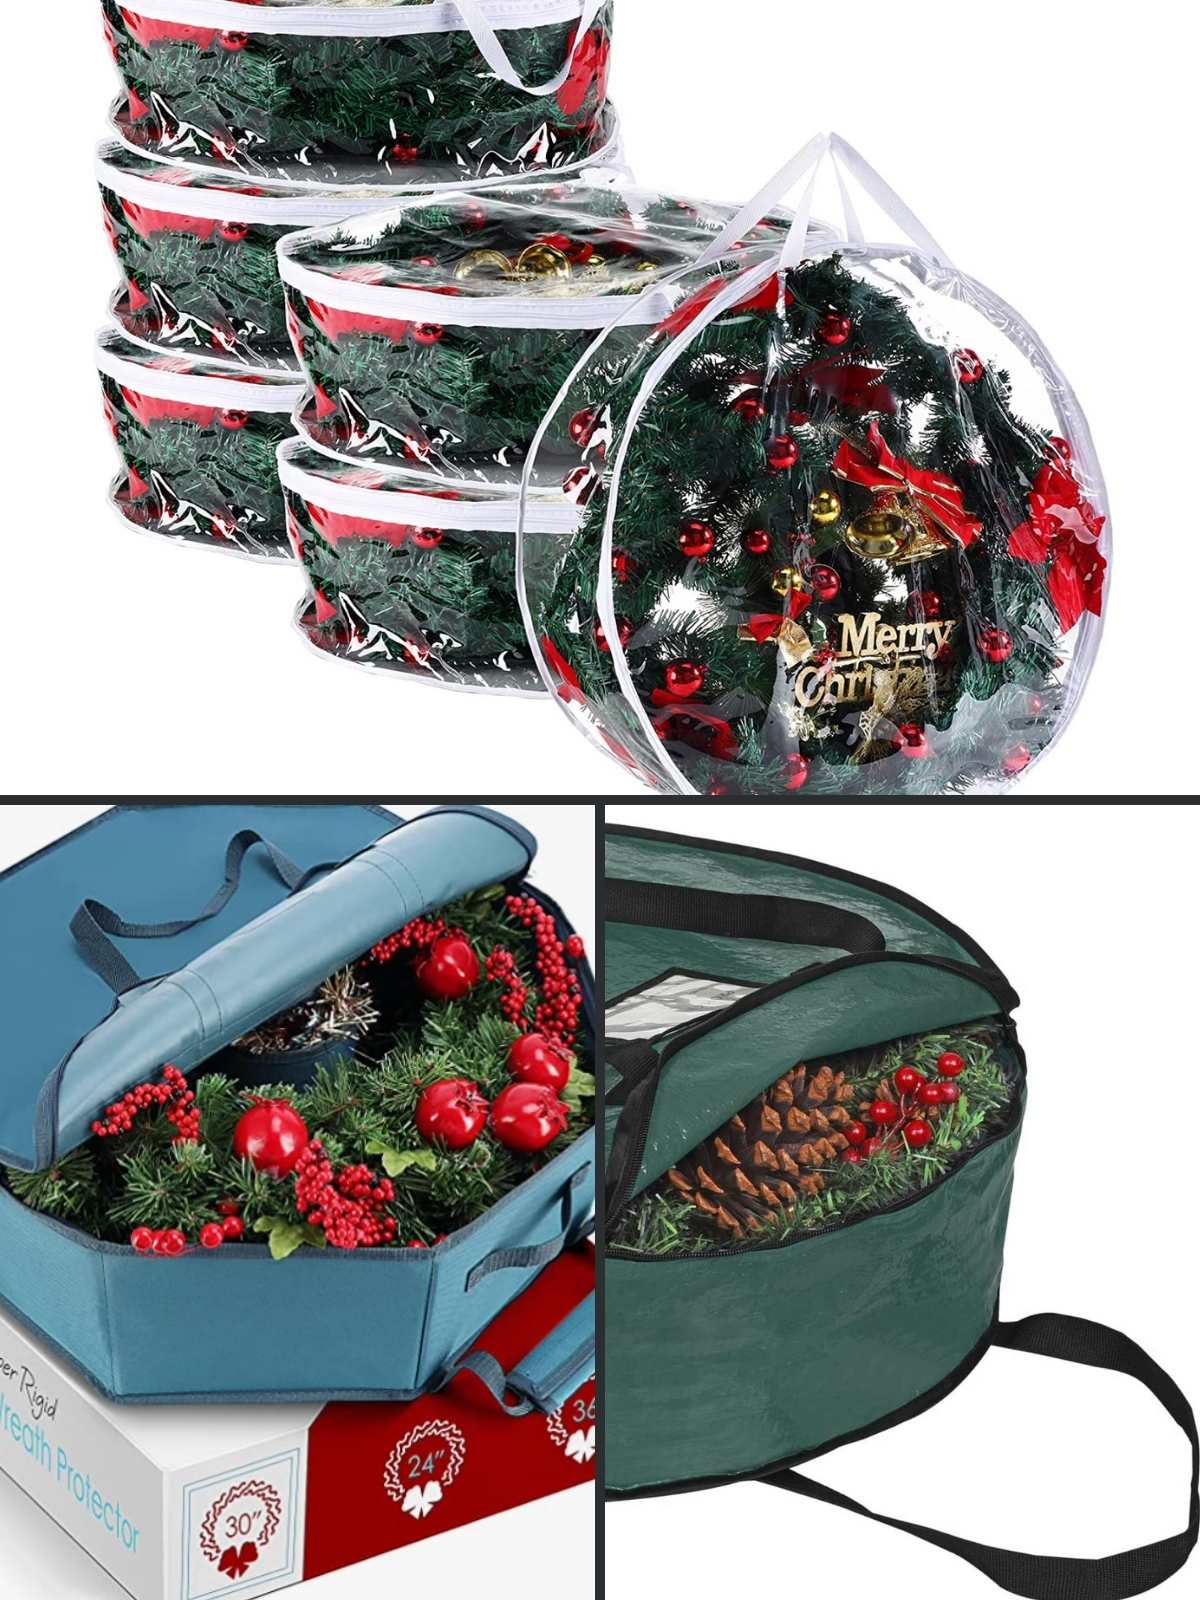 Christmas wreath bags for in the off season